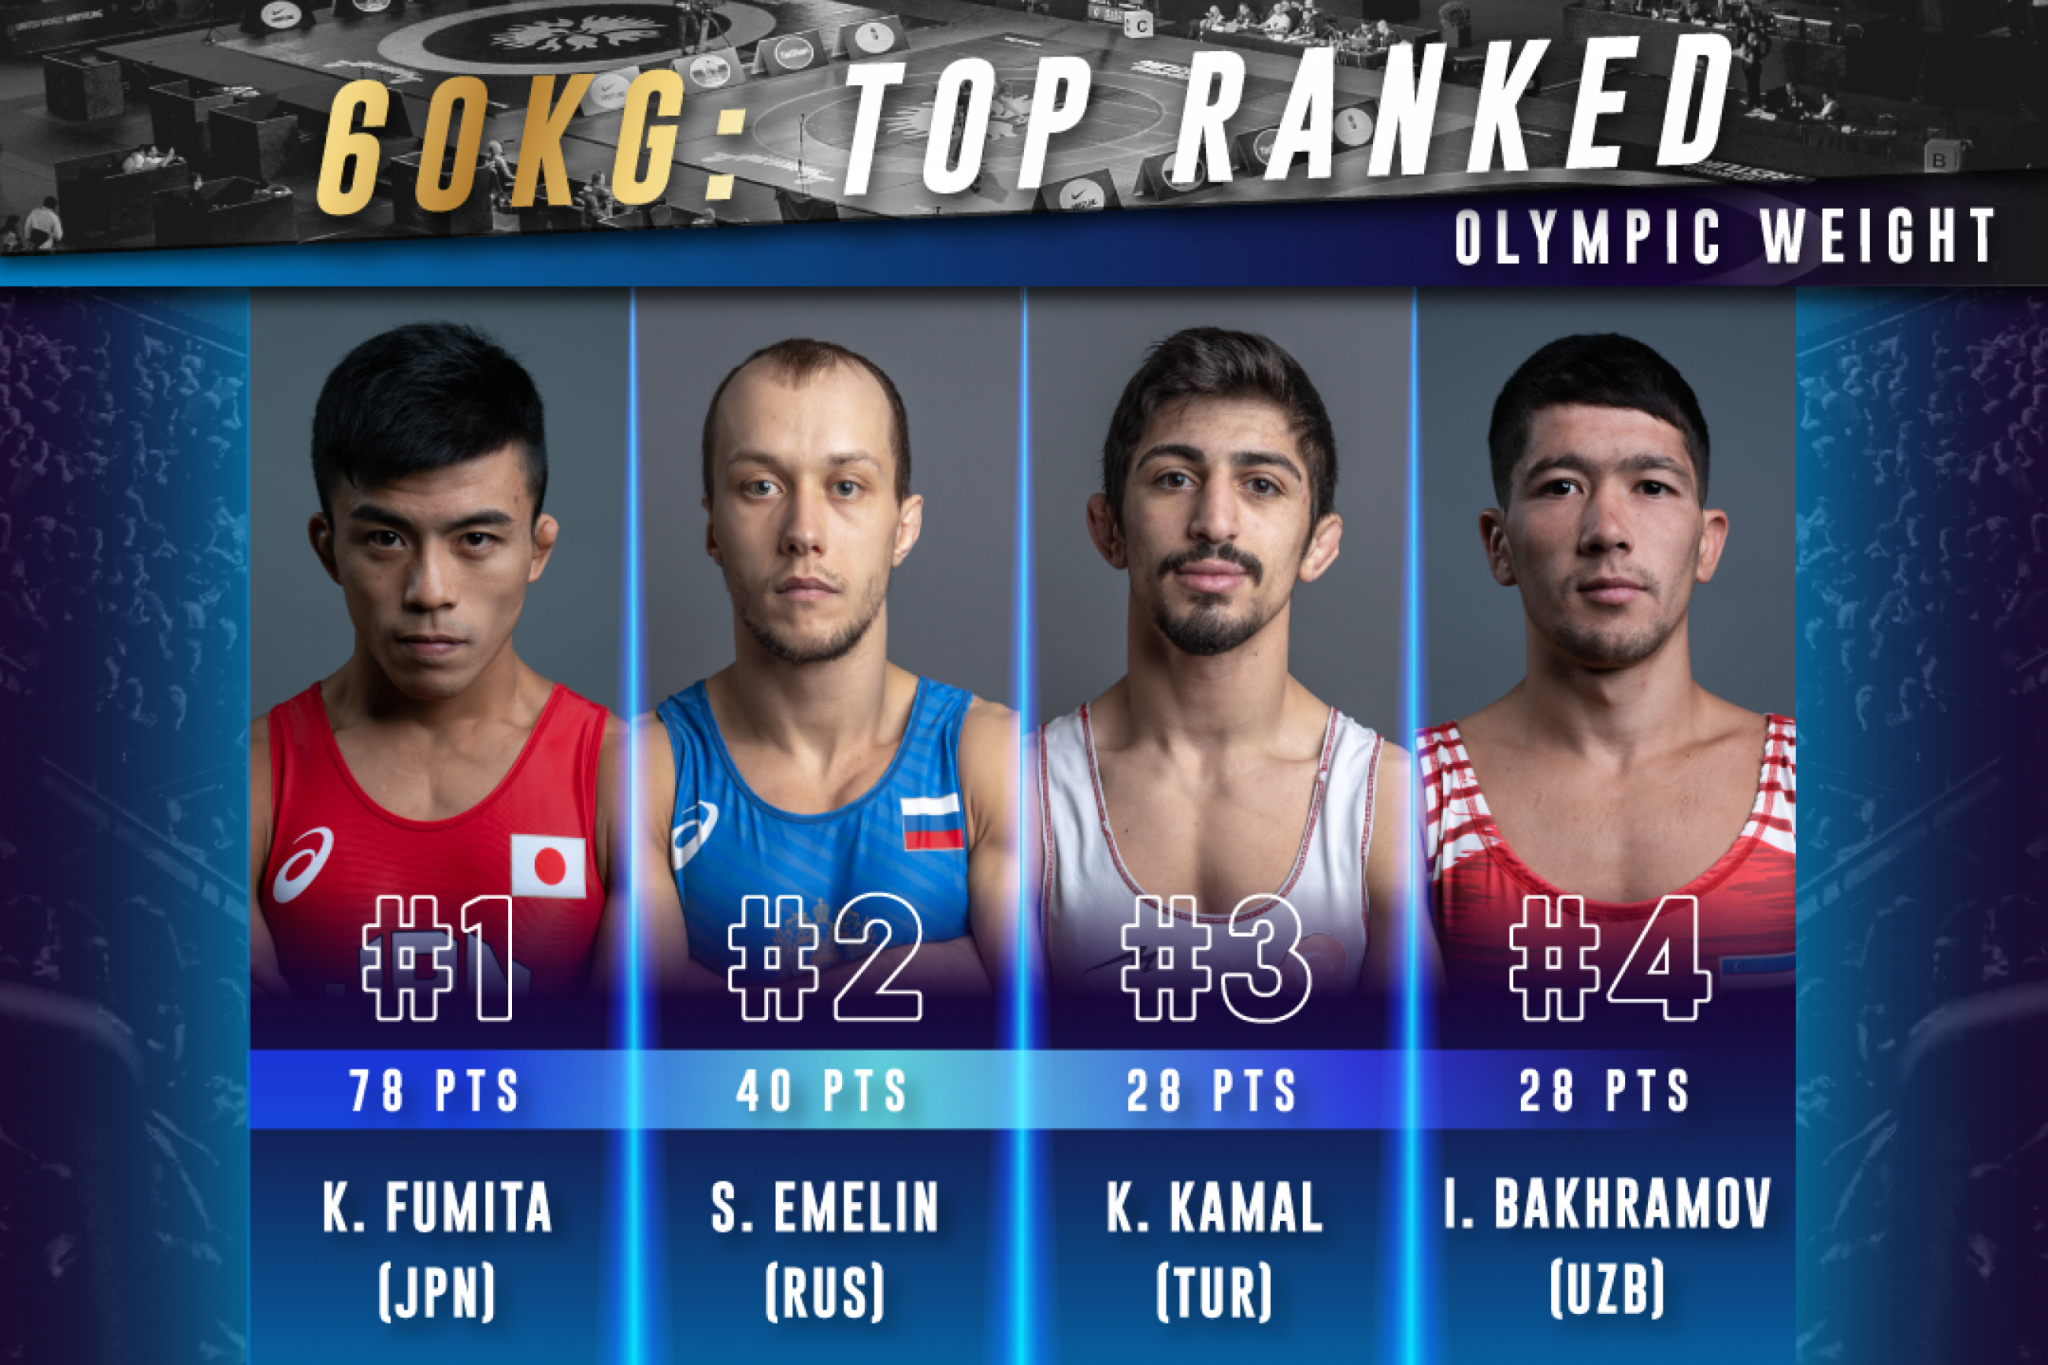 Fumita secures top-seed status for Greco-Roman wrestling at Tokyo 2020